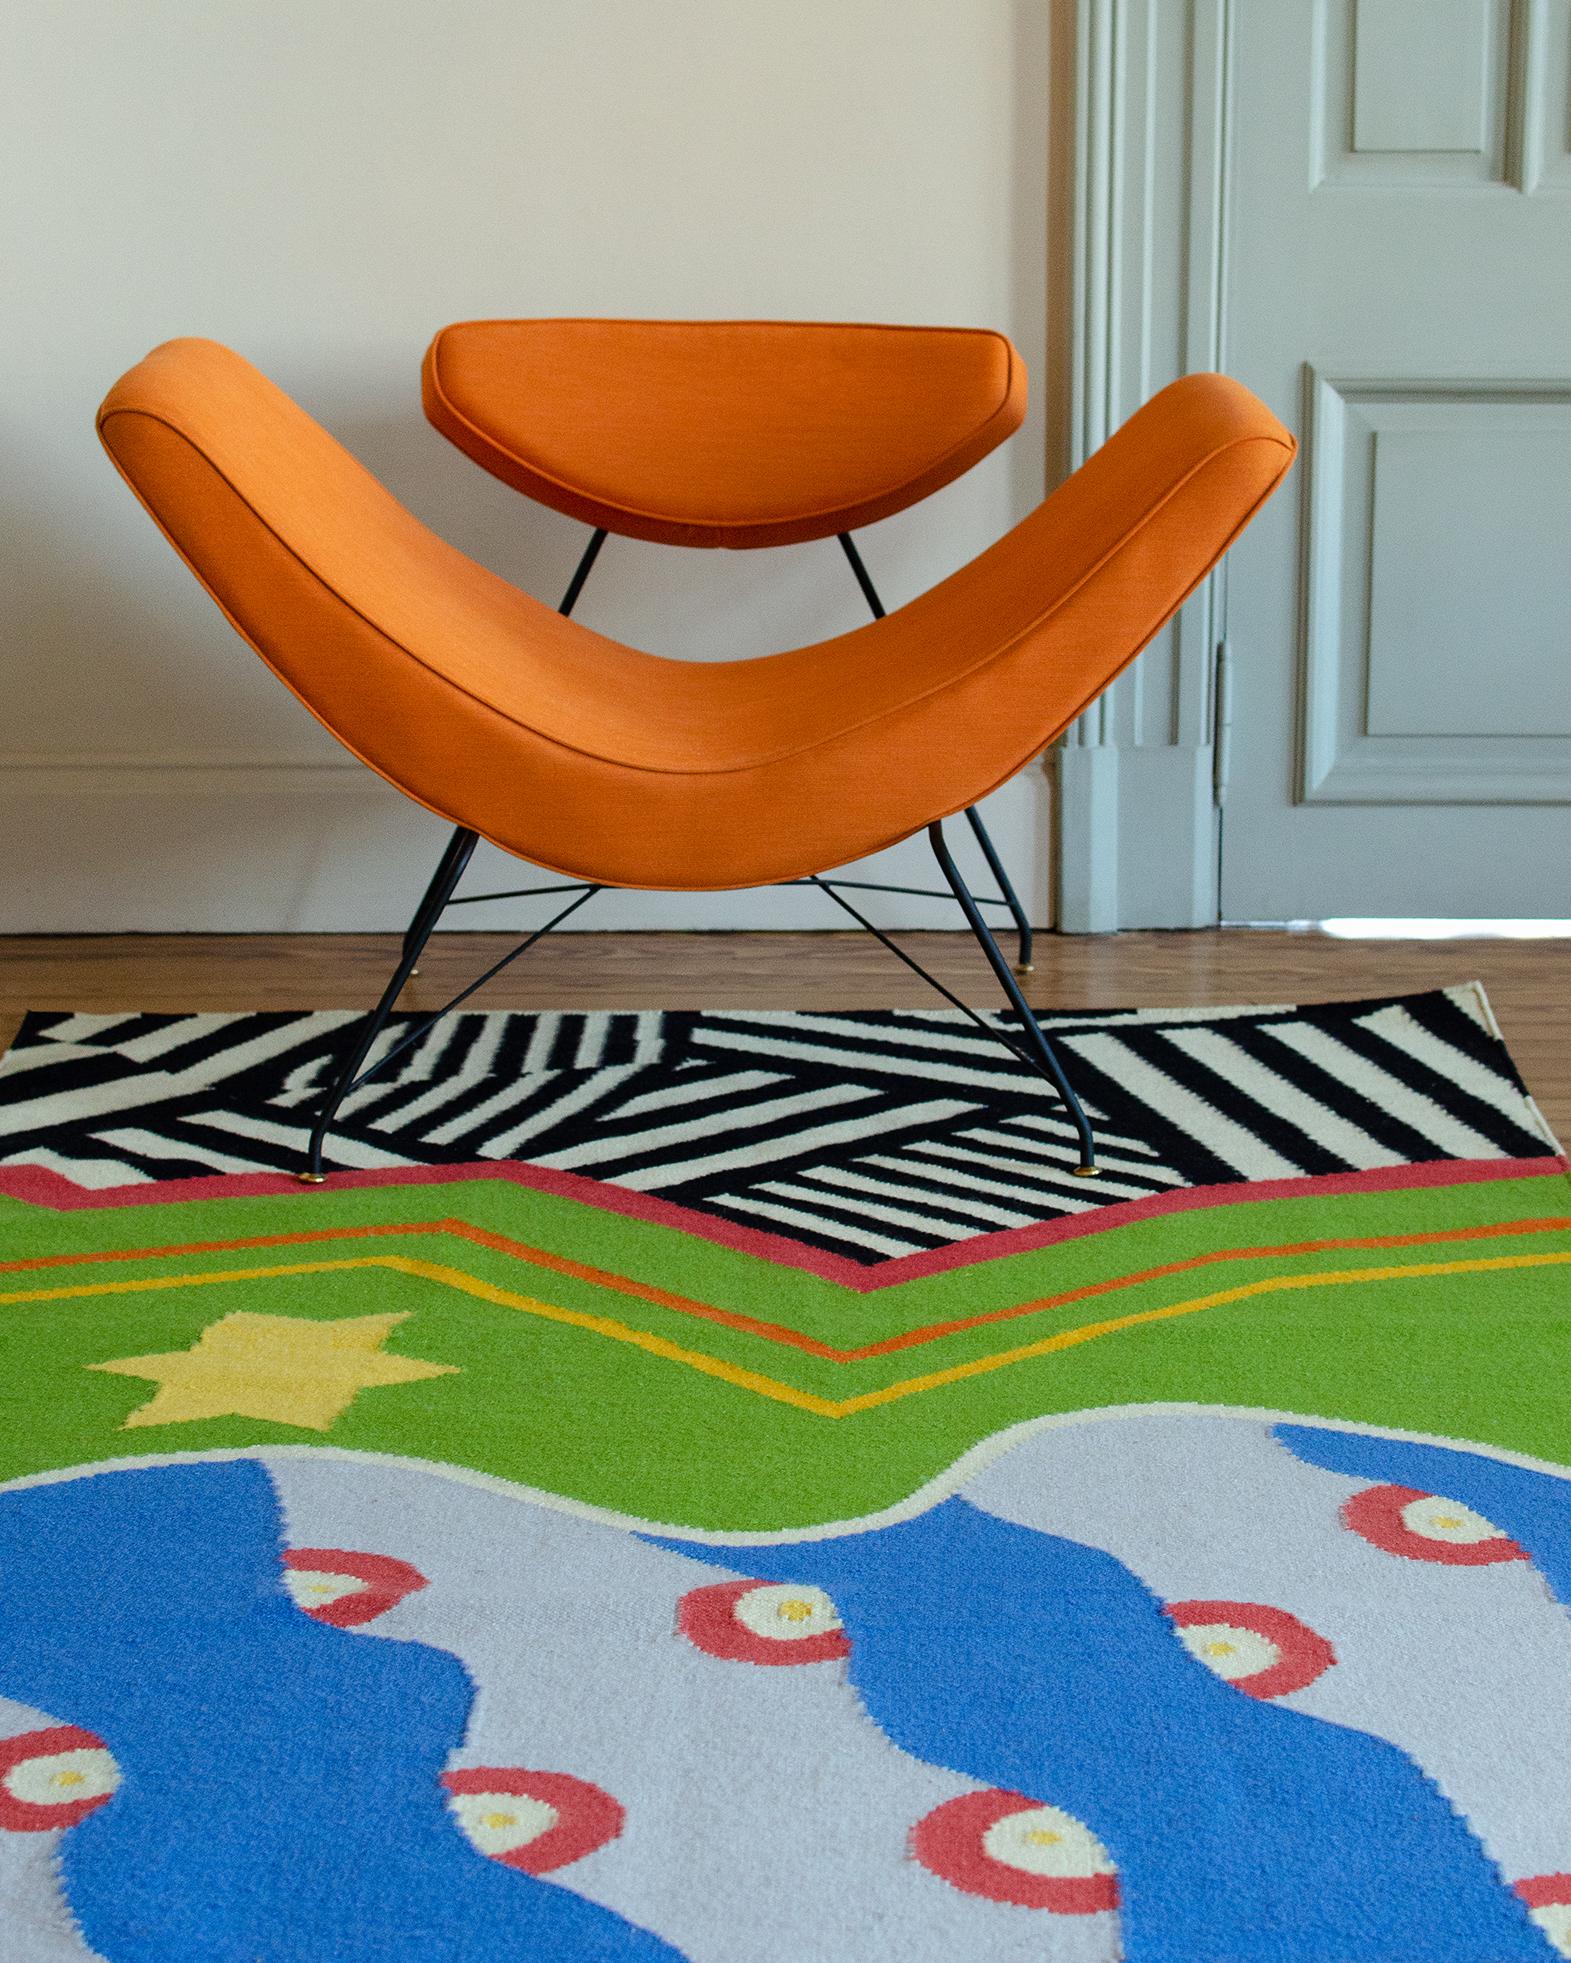 Adapted from the original artwork by Juan Stoppani & Jean-Yves Legavre, Patchwork, 2015.

LALANA RUGS is an applied arts initiative born from the desire to combine proposals by contemporary artists with traditional local techniques and noble